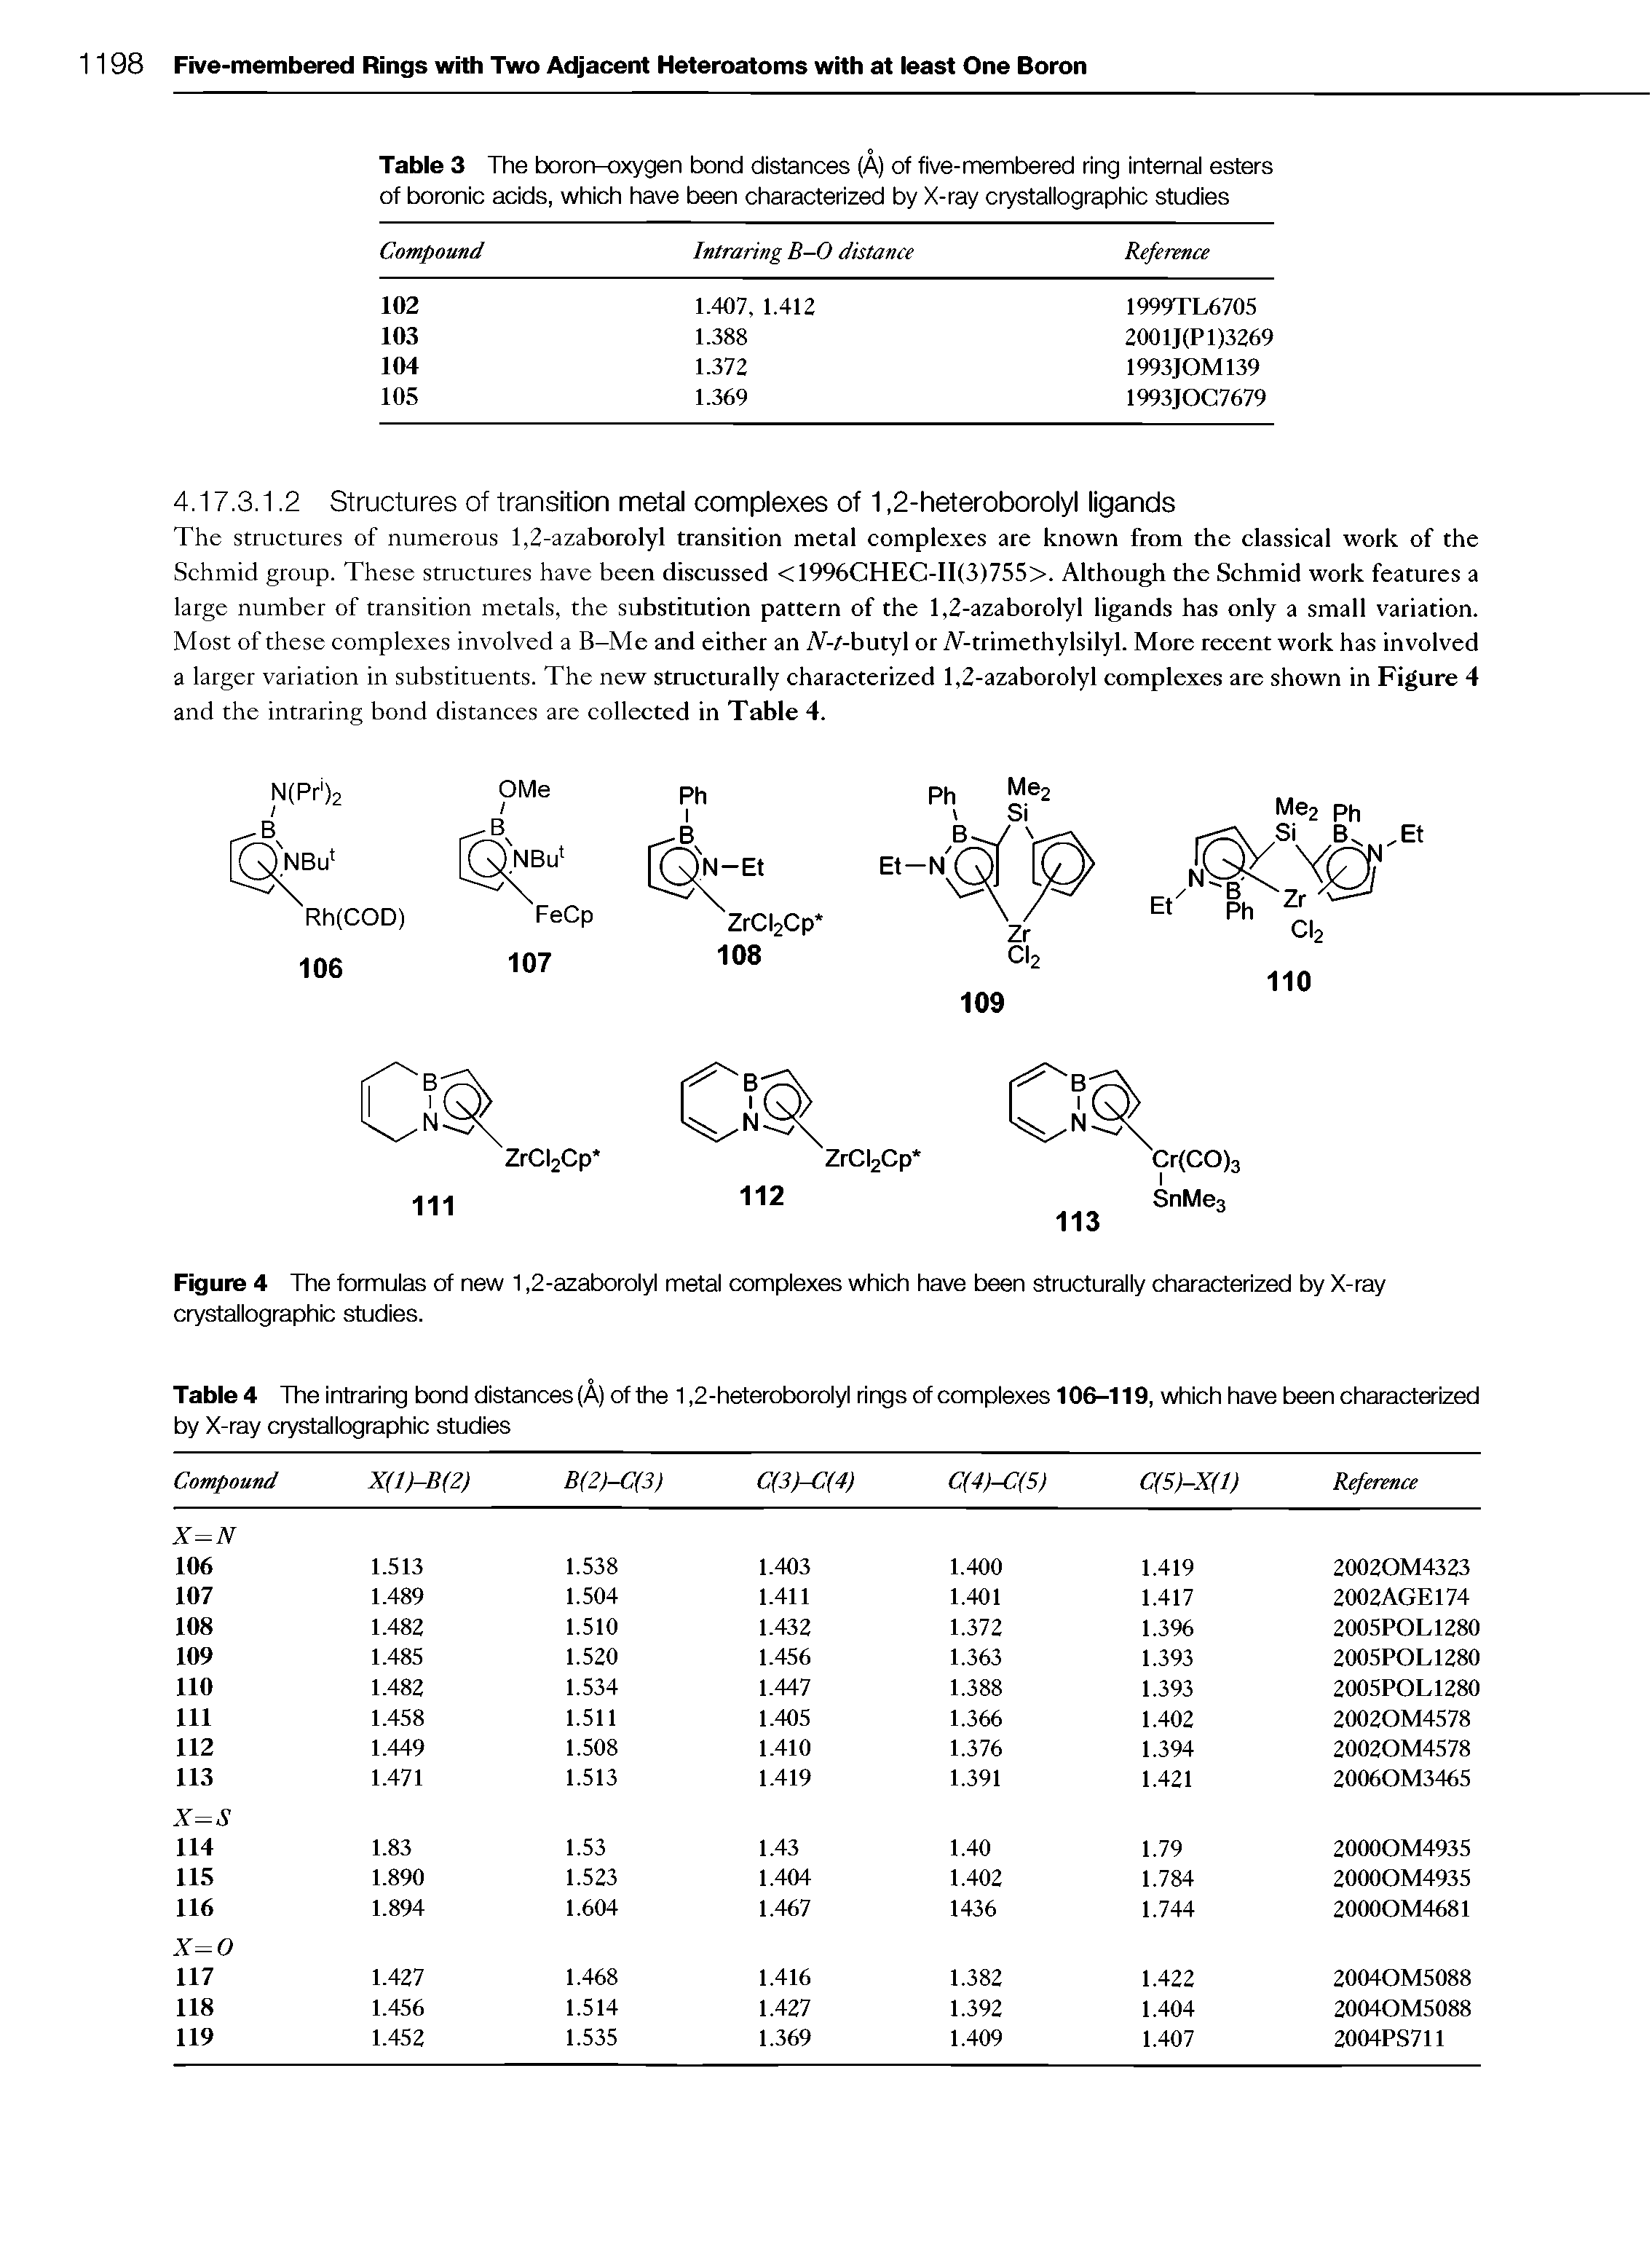 Table 3 The boron-oxygen bond distances (A) of five-membered ring internai esters of boronic acids, which have been characterized by X-ray crystaiiographic studies...